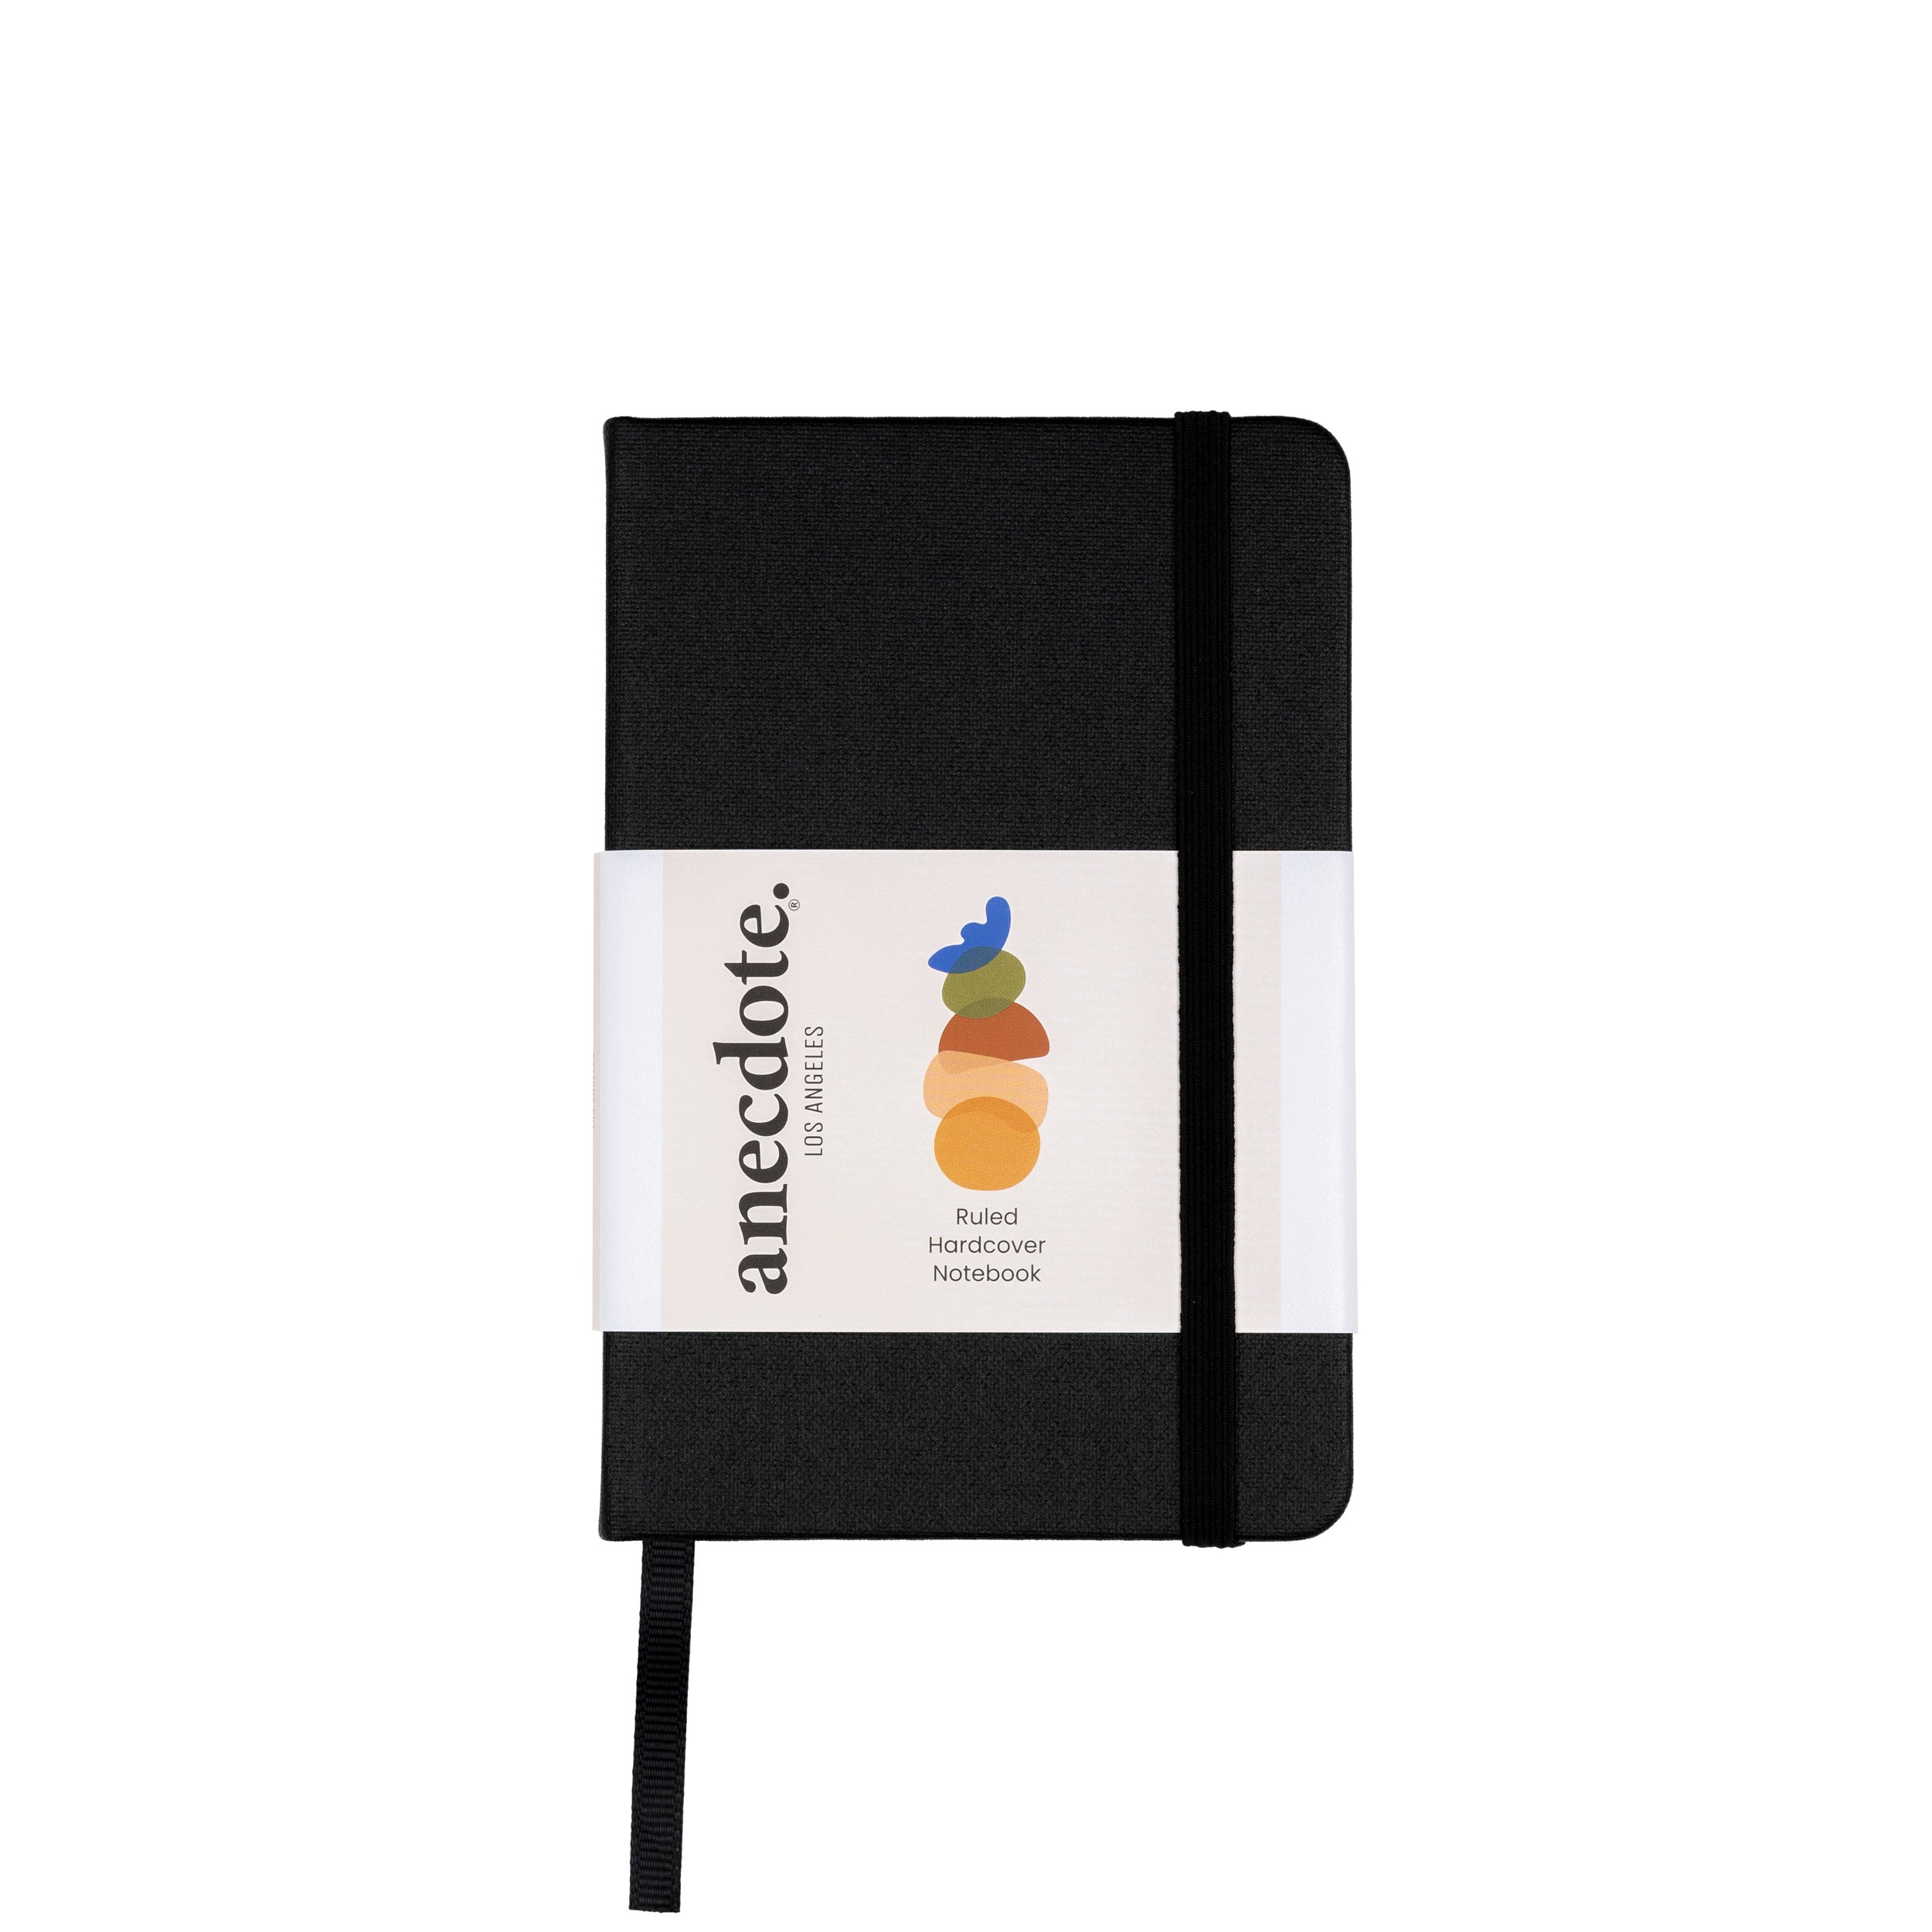 Anecdote, Pocket-Sized Journal Notebook, Ruled/Lined Pages, 7 Colors ...